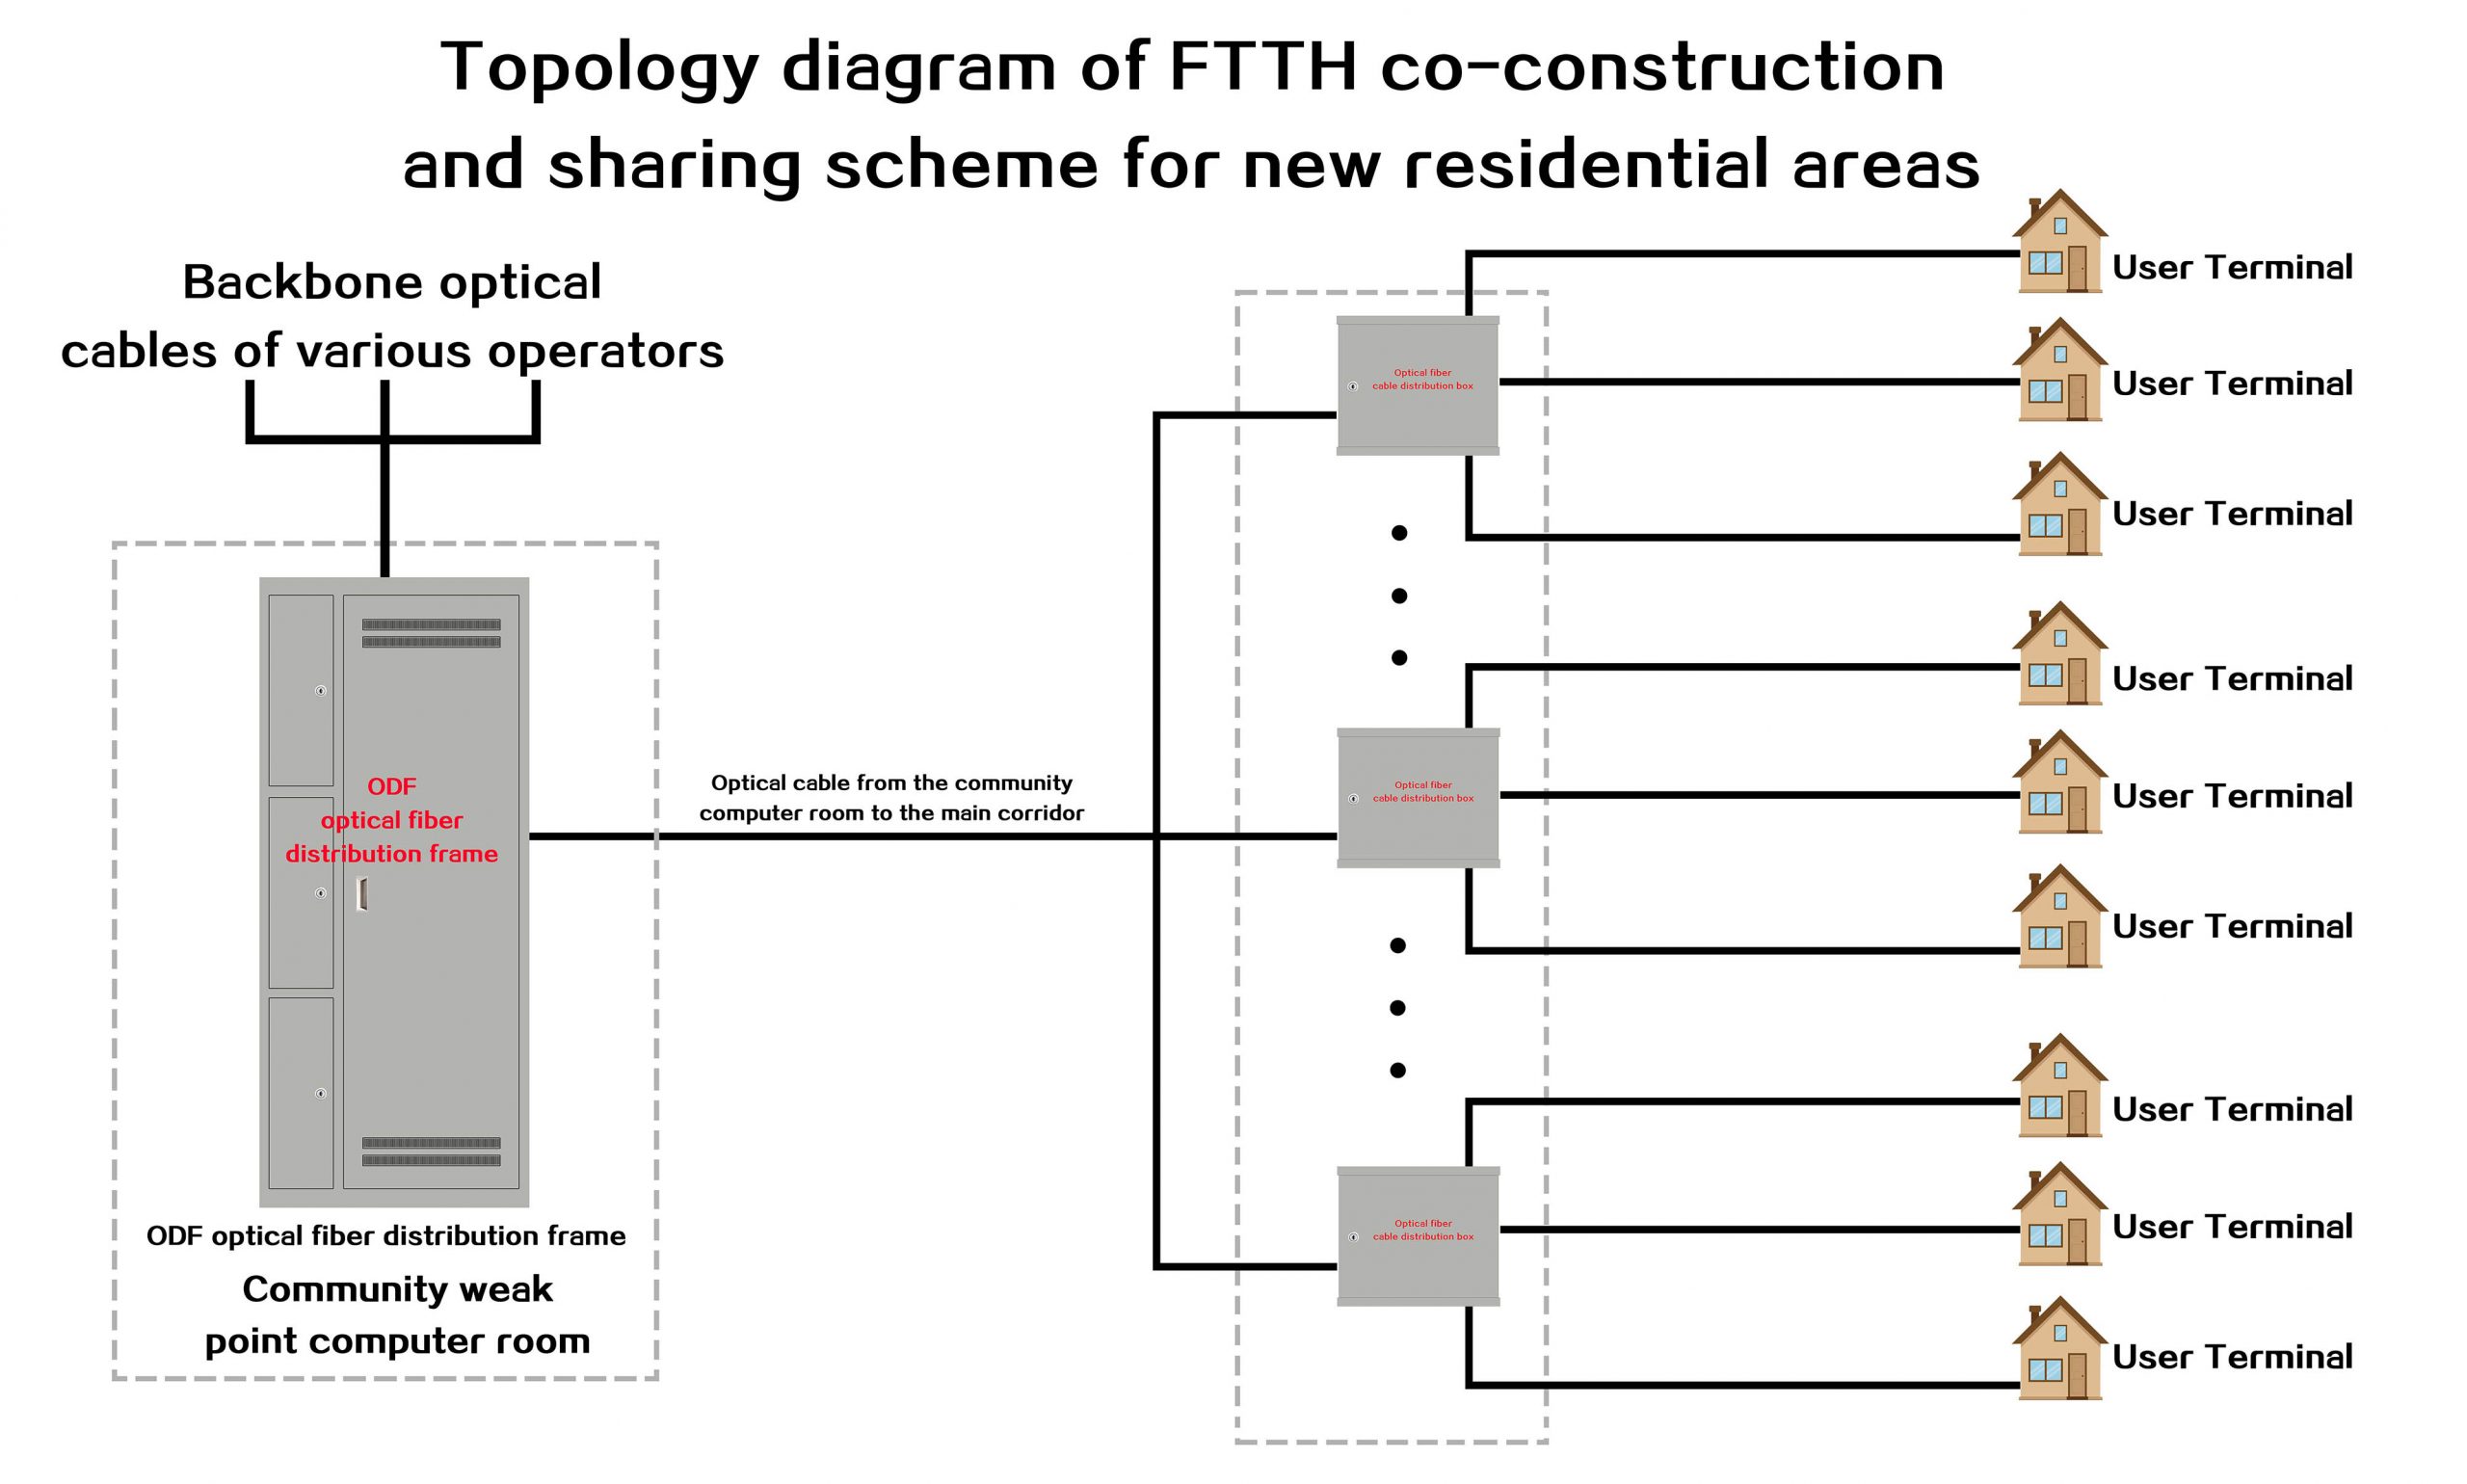 FTTH co-construction and sharing solution for new residential areas